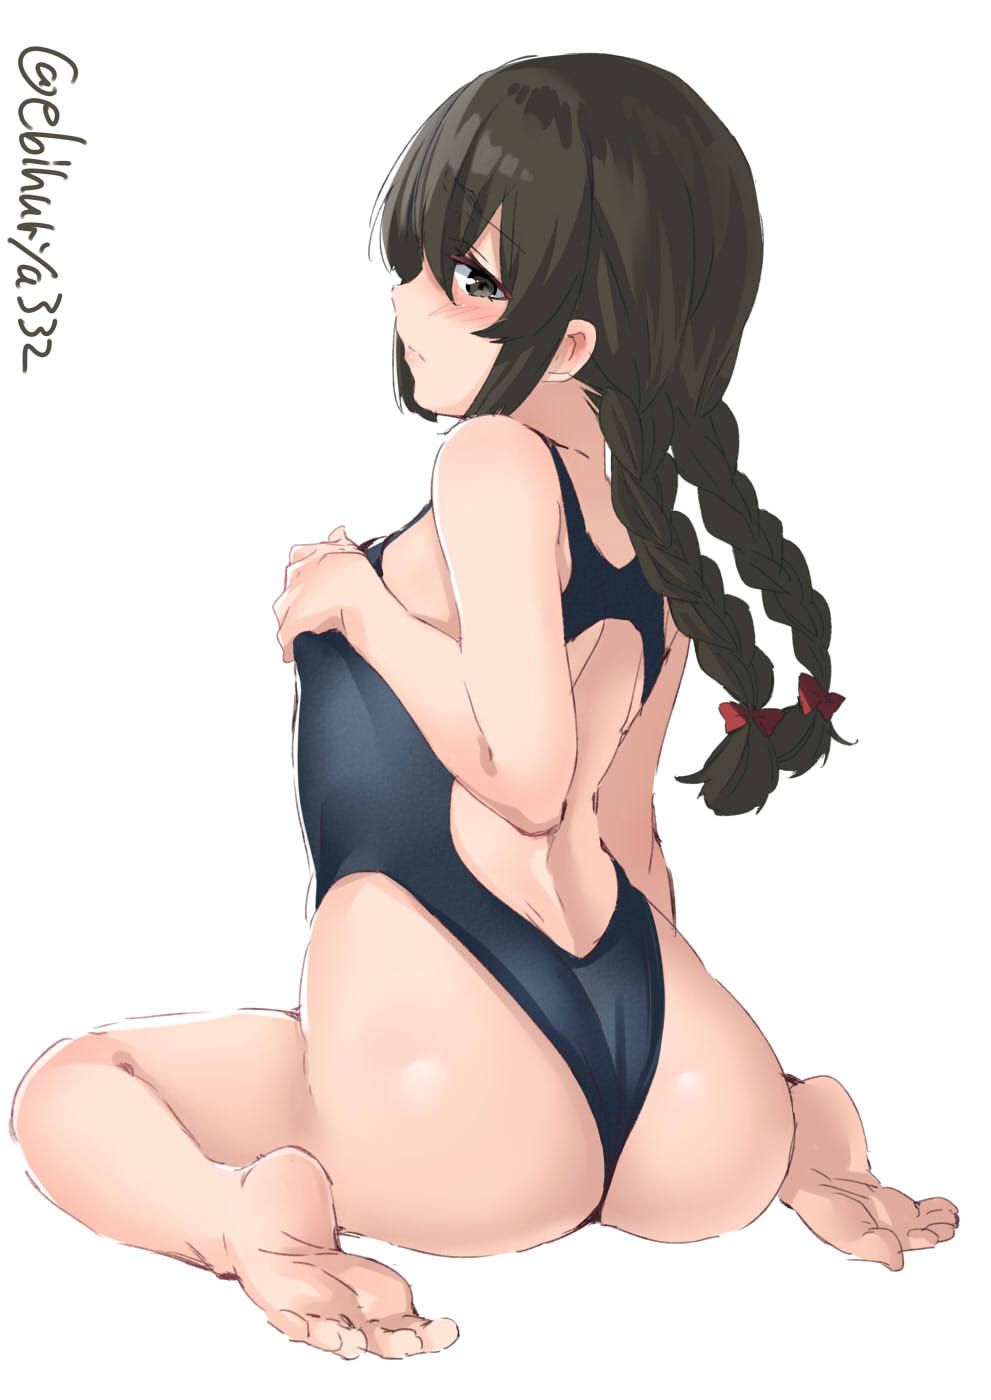 【2nd】Erotic image of a girl in a swimsuit Part 13 18